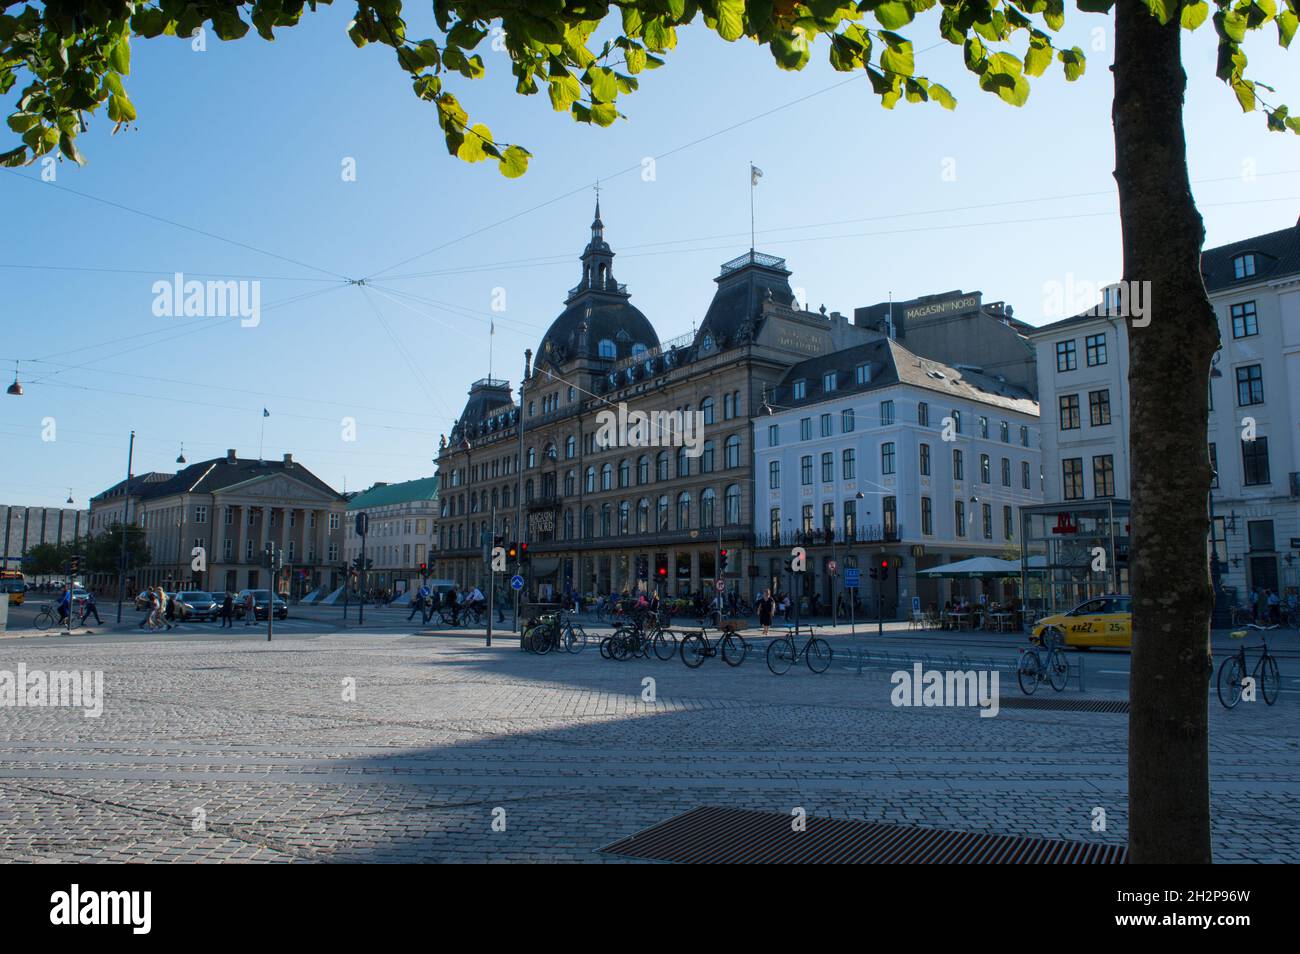 Copenhagen, Denmark - 02 Sep 2021: Magasin du Nord, famous fashionable department store in a historic building Stock Photo